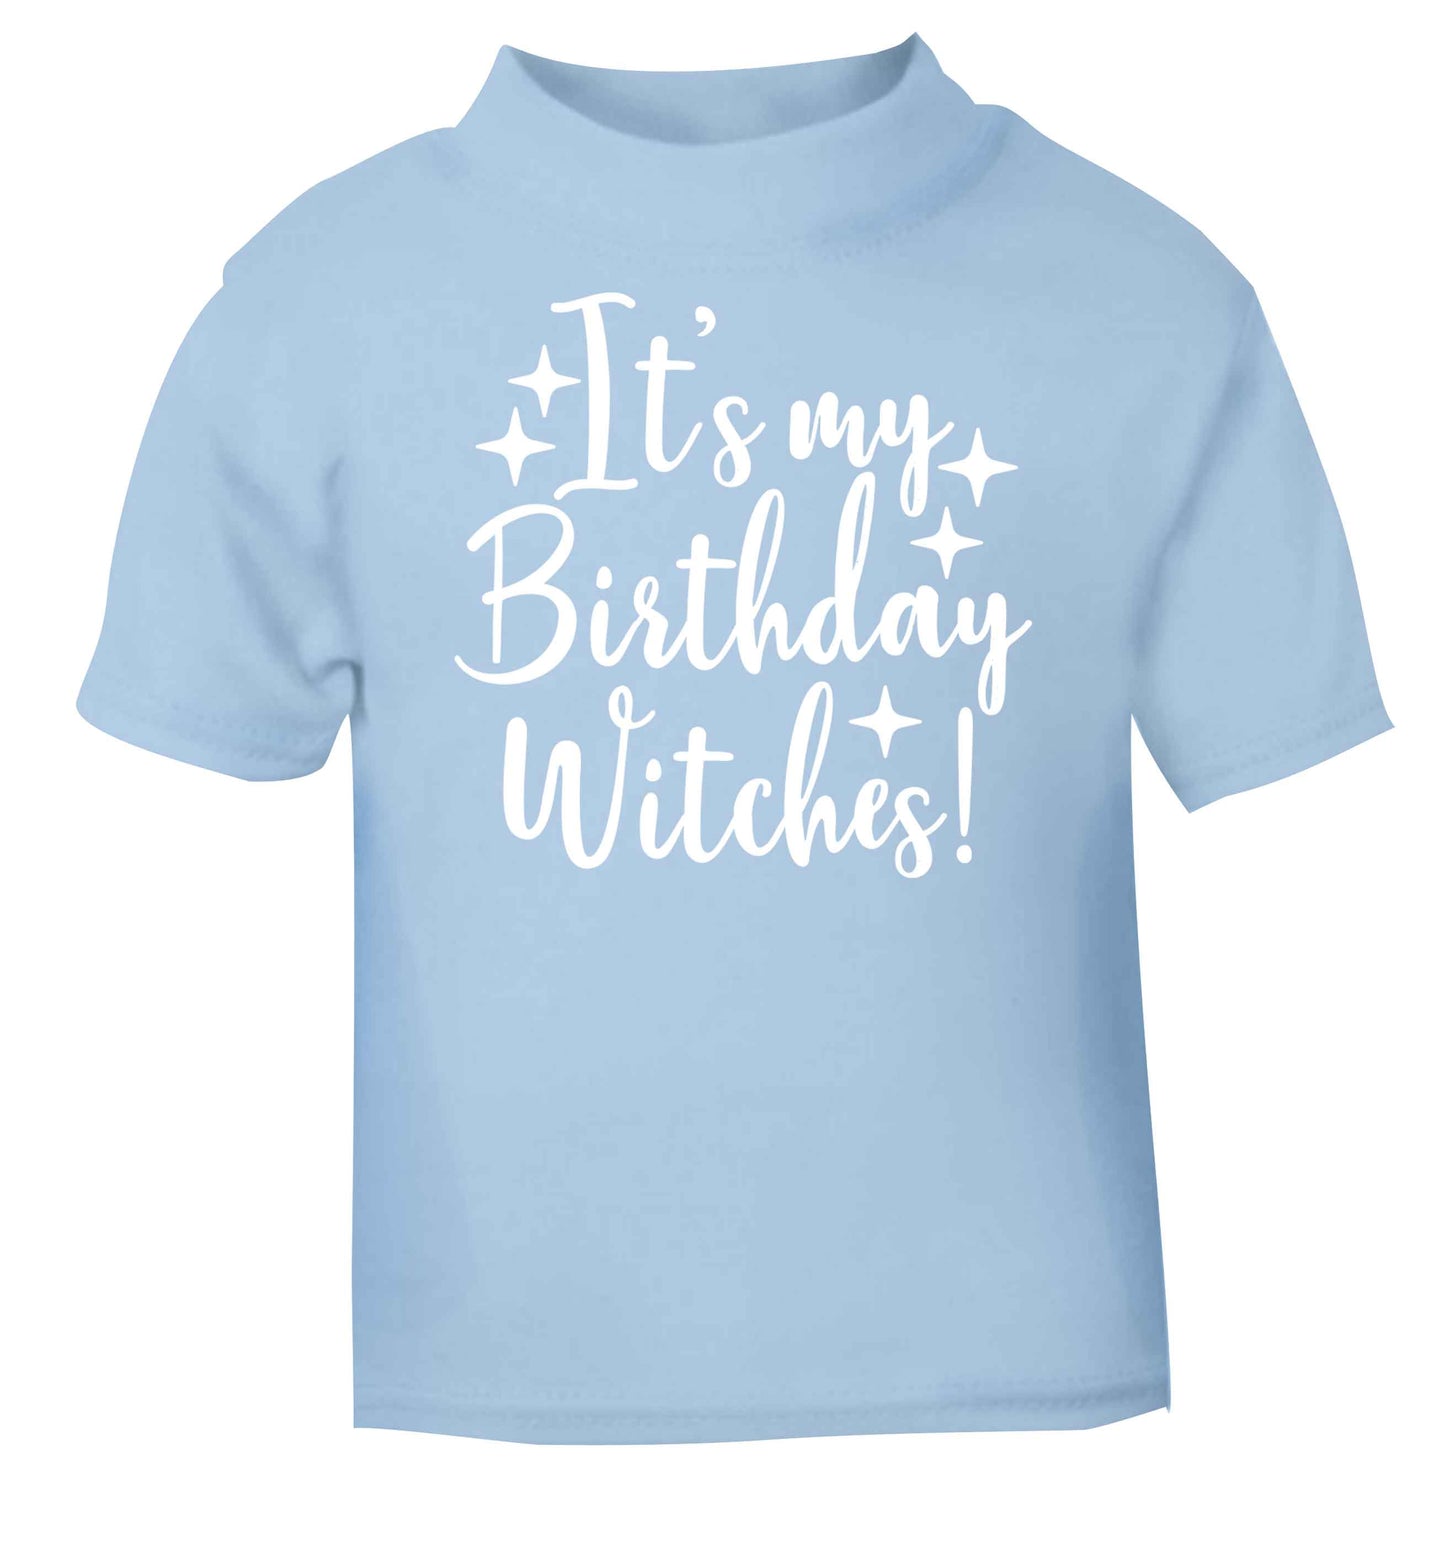 It's my birthday witches!light blue baby toddler Tshirt 2 Years